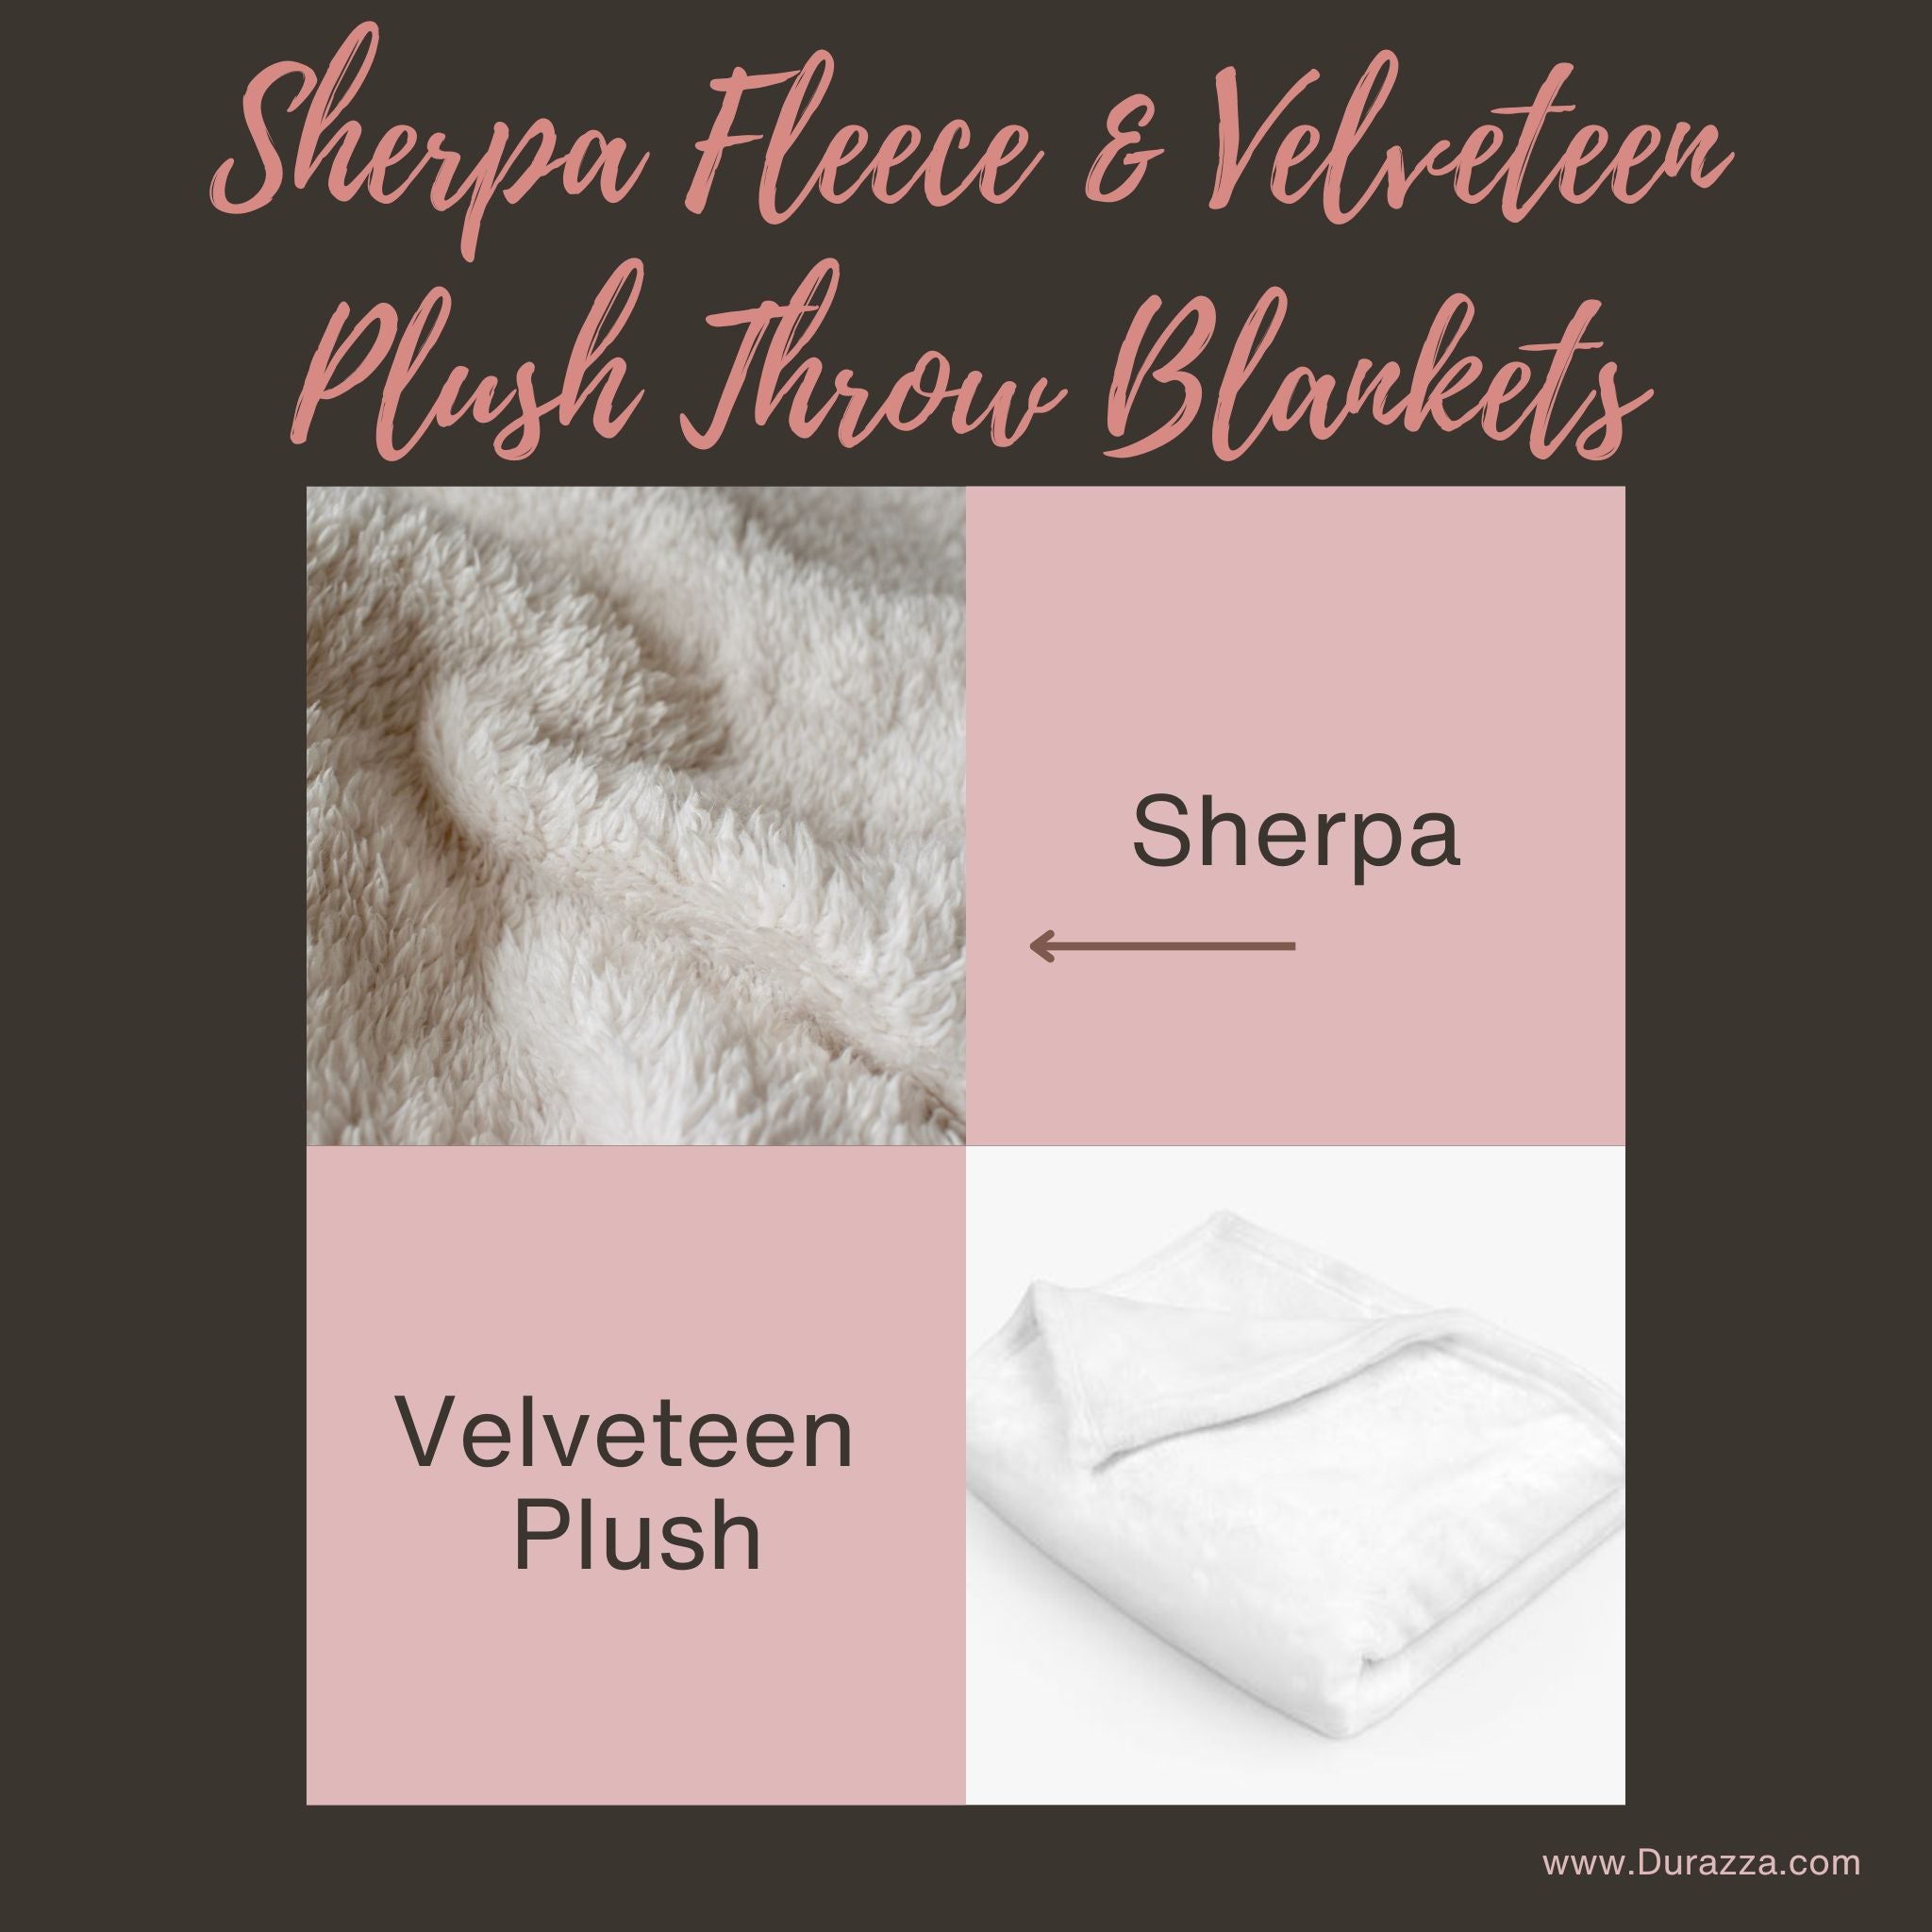 Learn more about our velveteen plush and sherpa fleece throw blankets